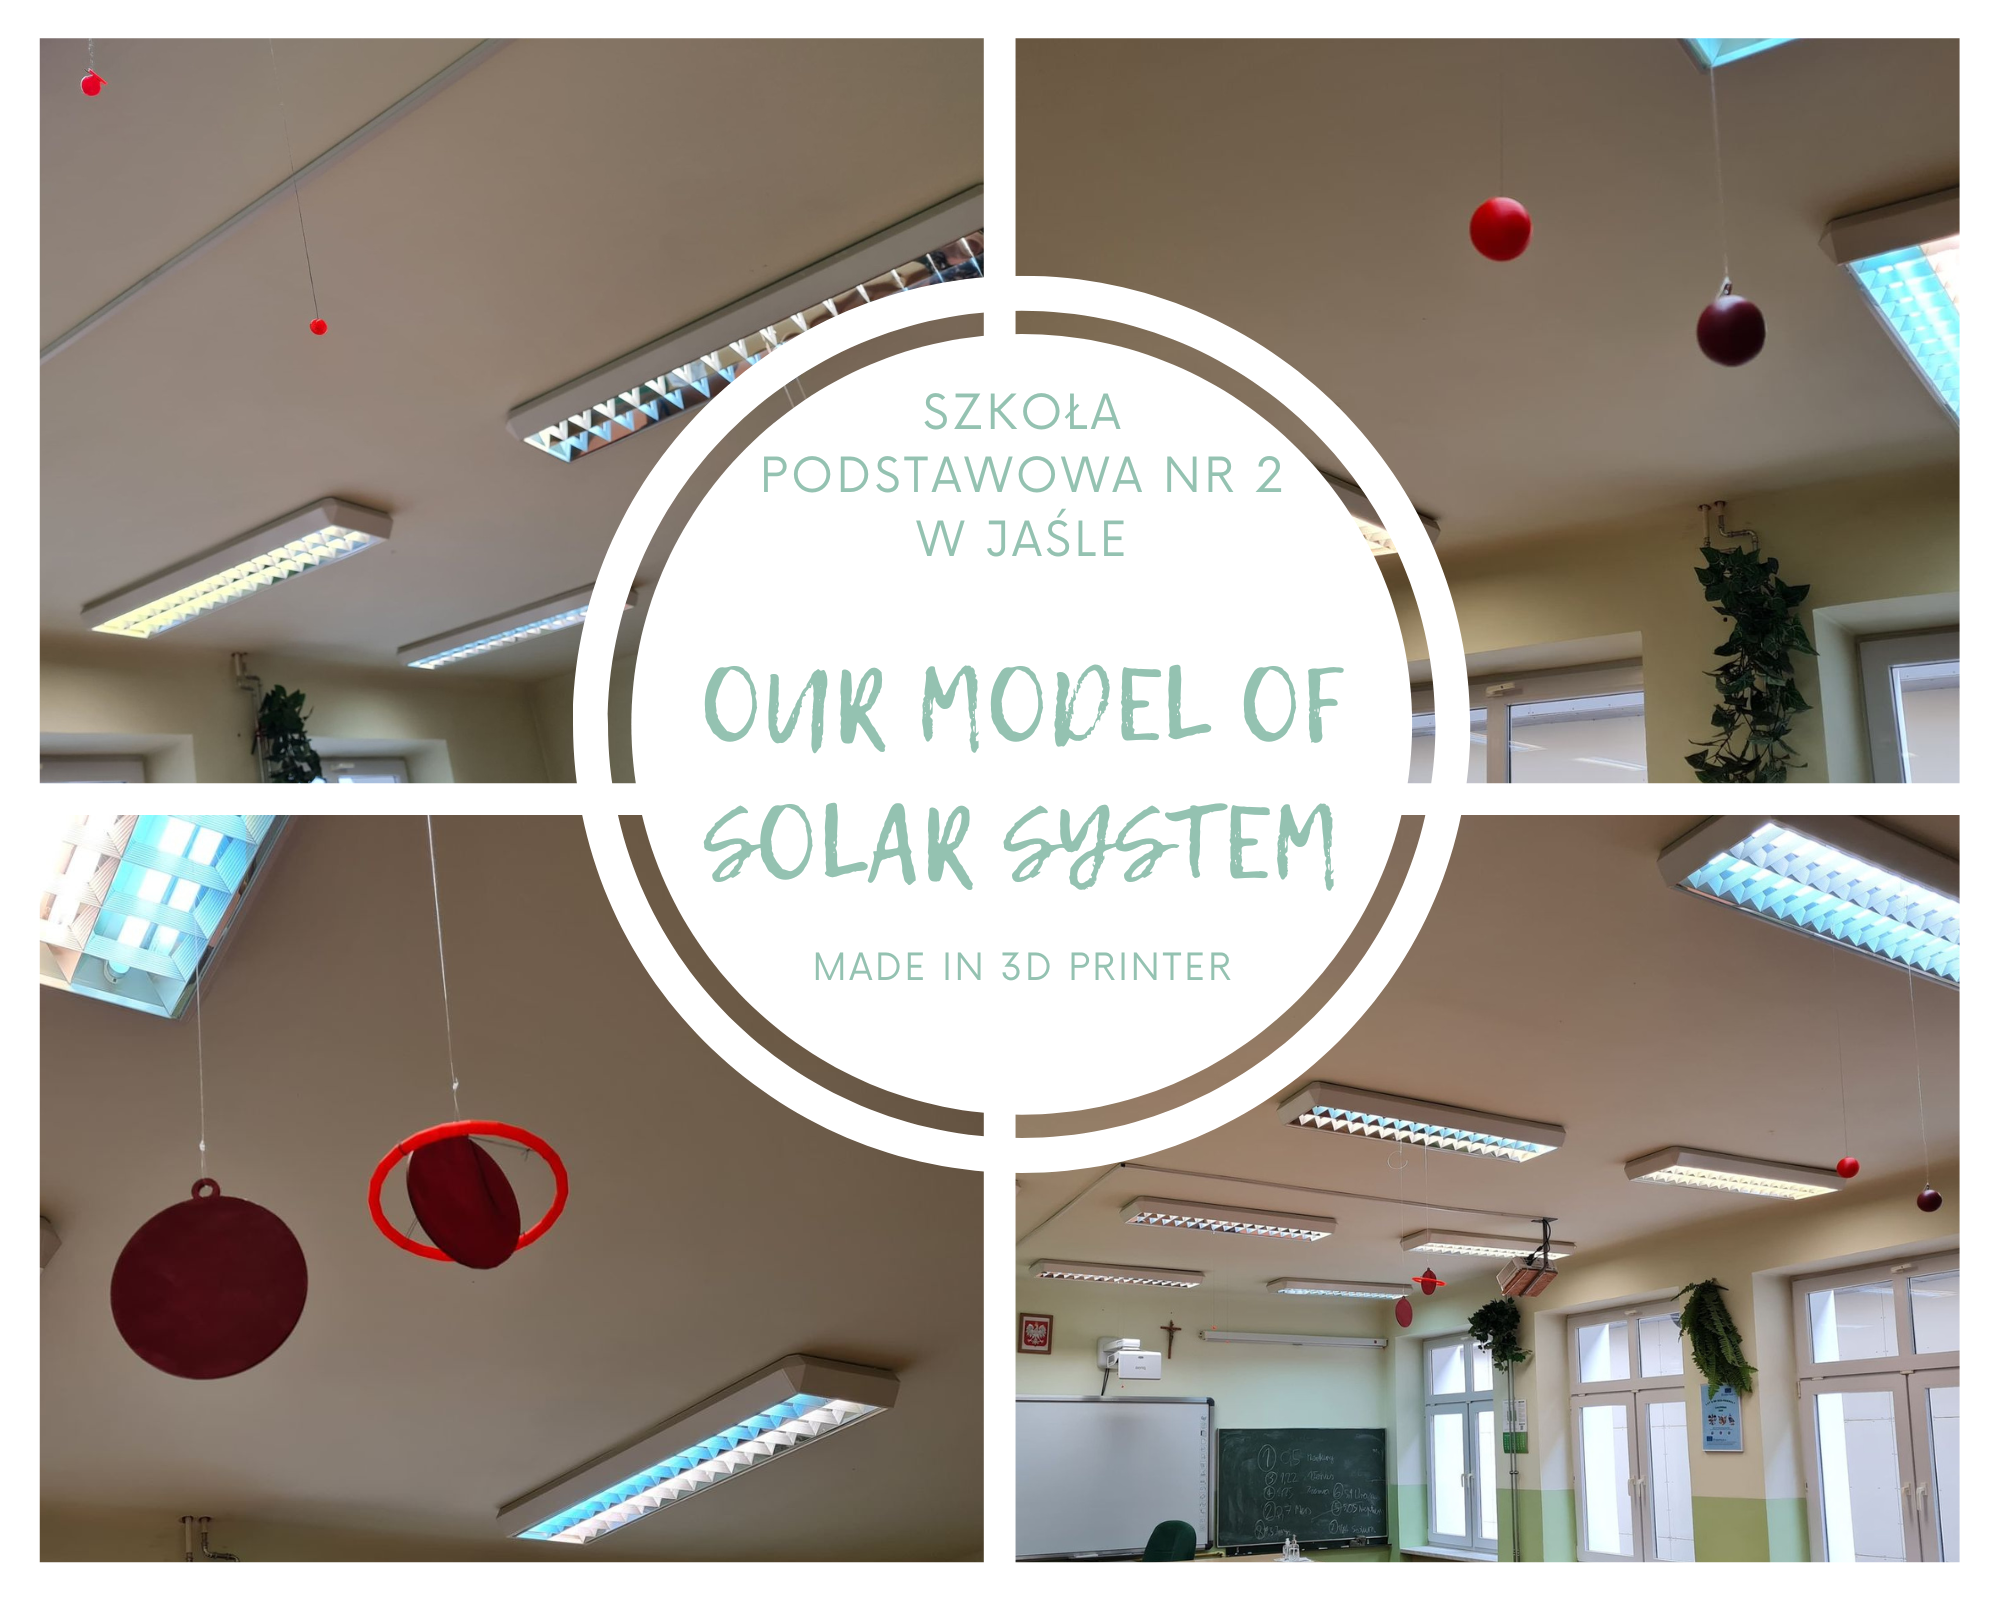 OUR_MODEL_OF_SOLAR_SYSTEM_(1)